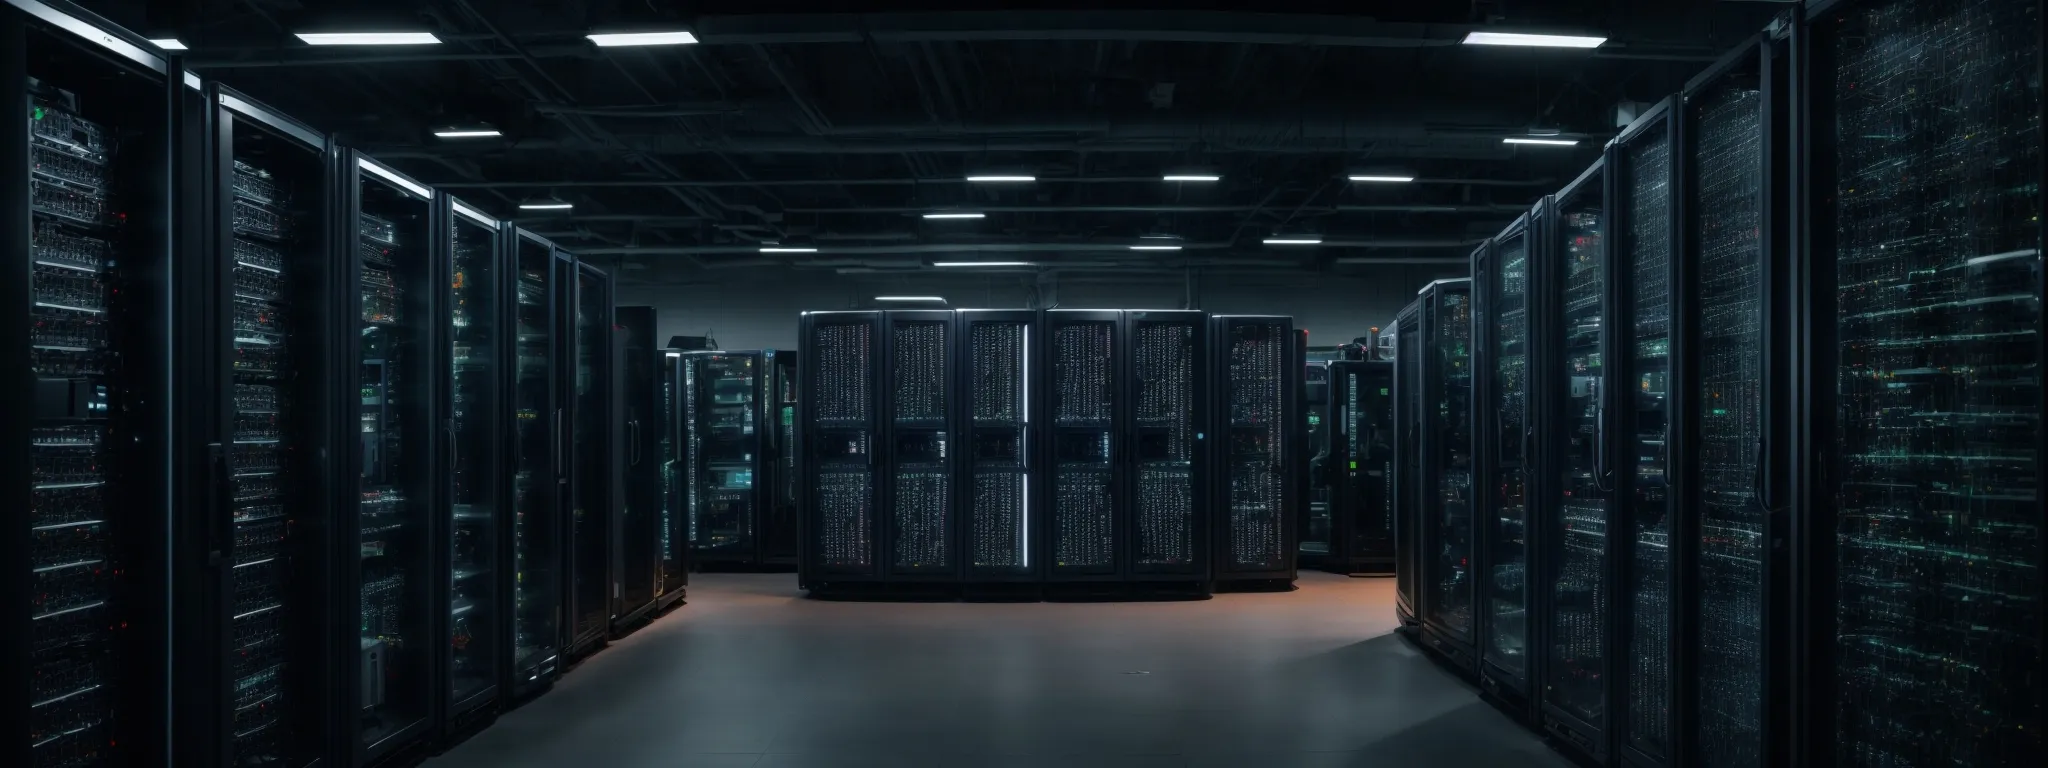 a panoramic view of a server room with rows of high-tech equipment symbolizing the power of search engine databases.